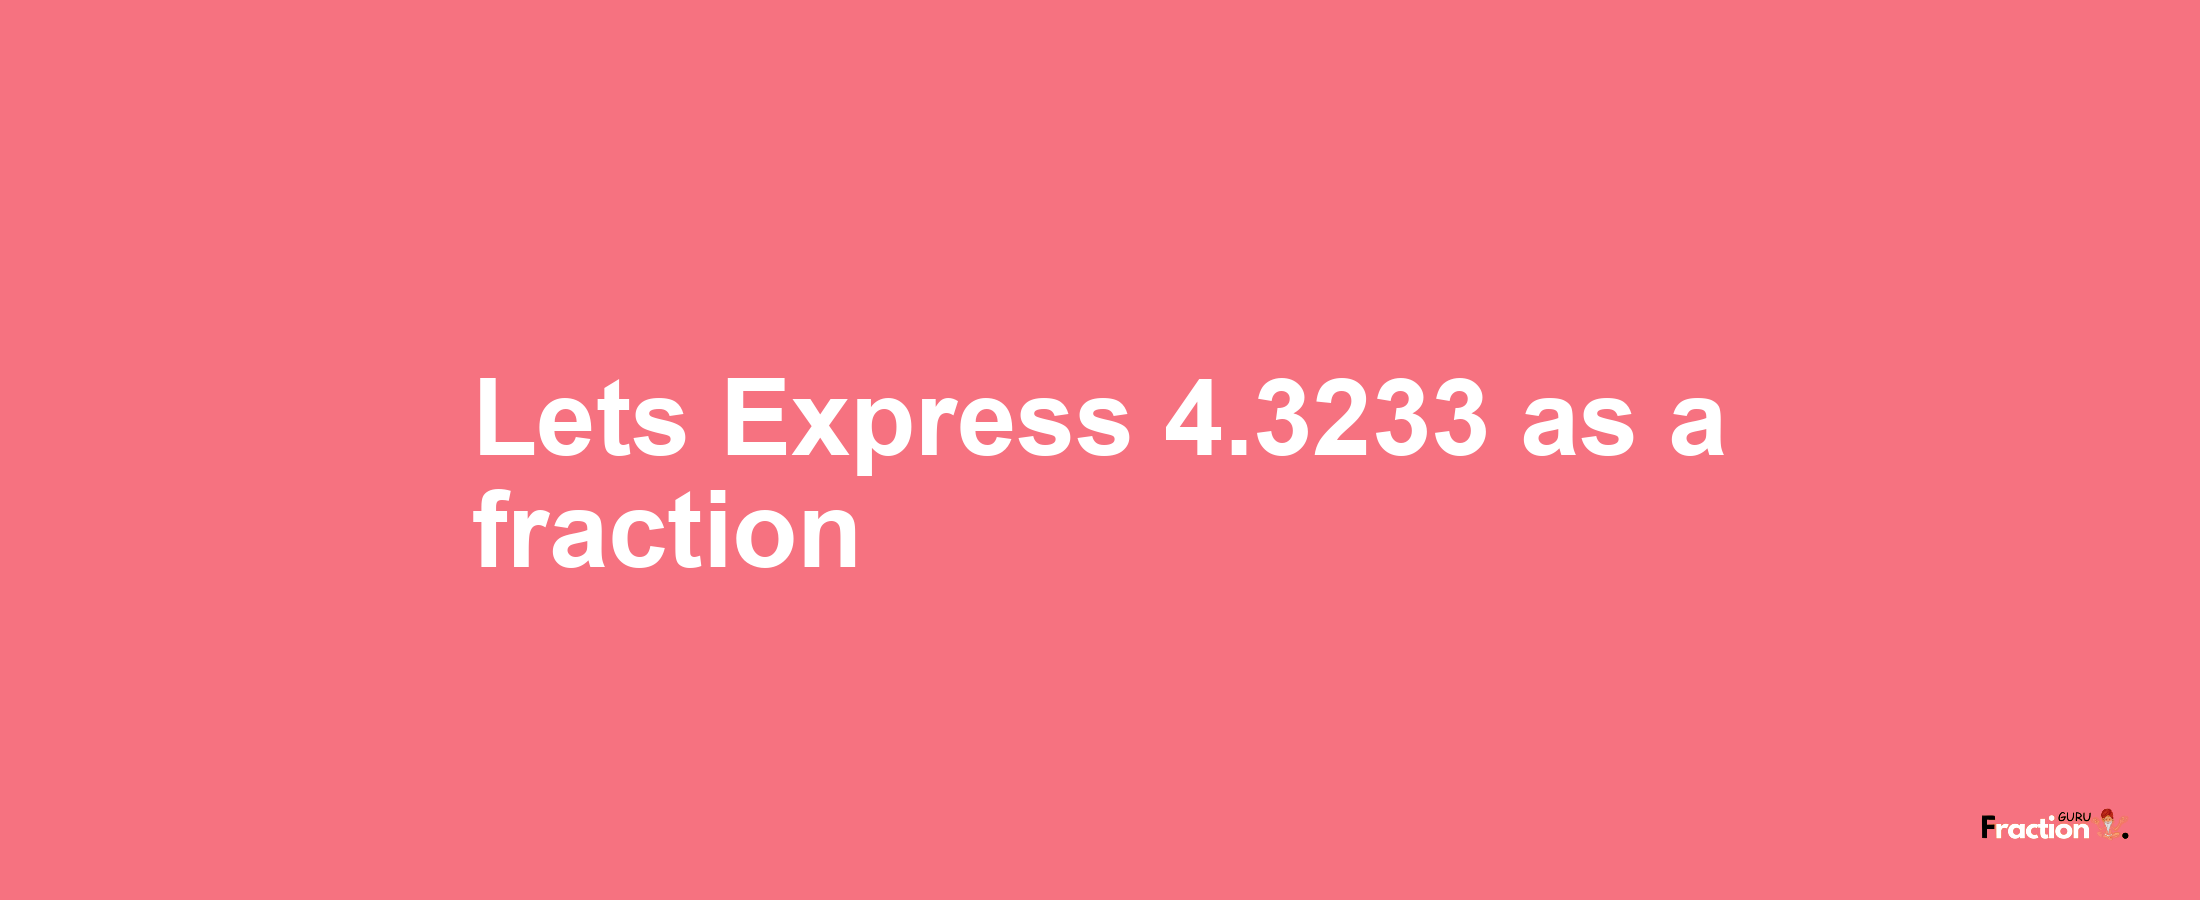 Lets Express 4.3233 as afraction